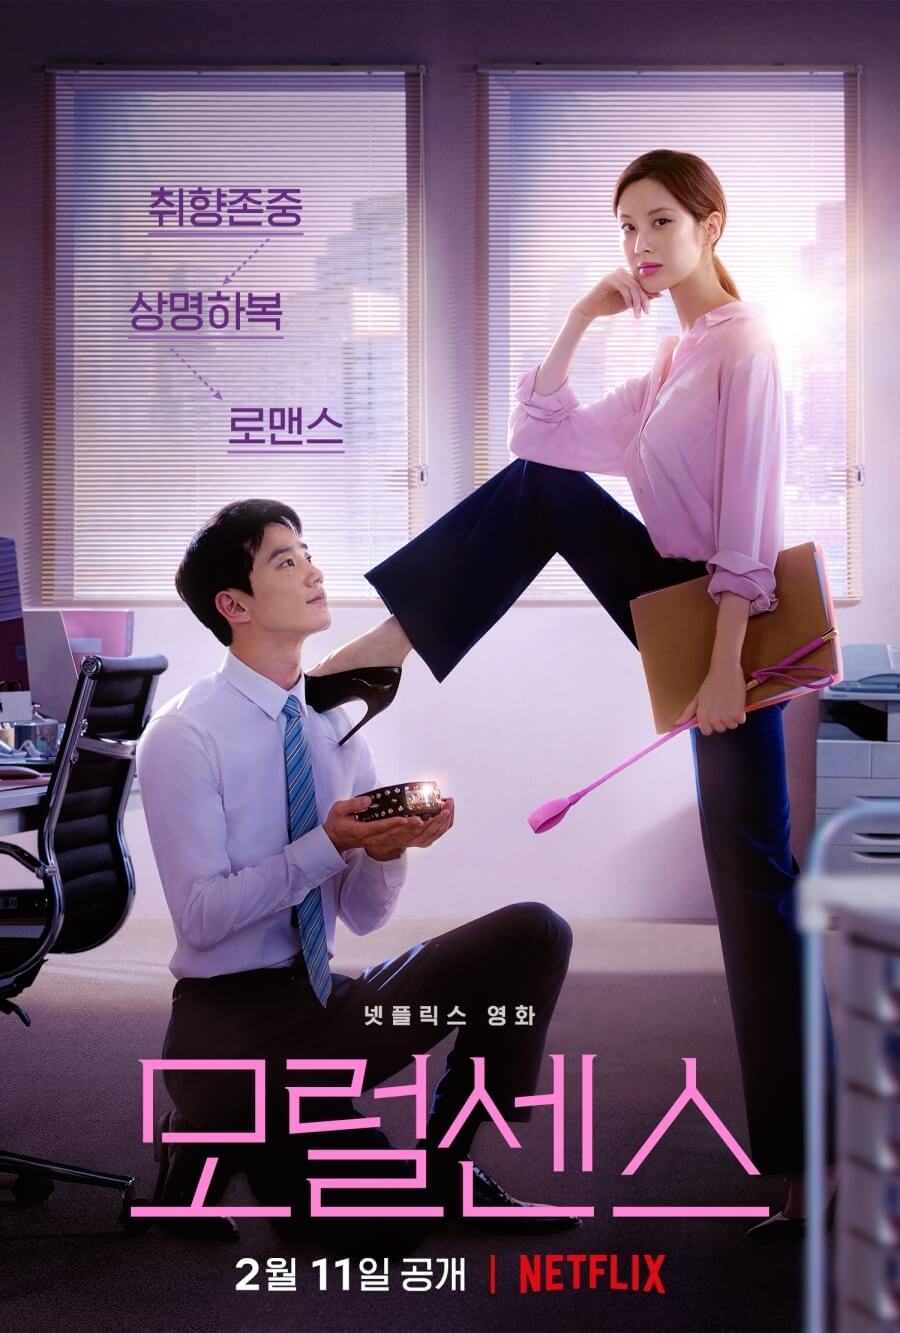 "Moral Sense" Review: The Majority Should Still Respect the Personal Interests of the Minority